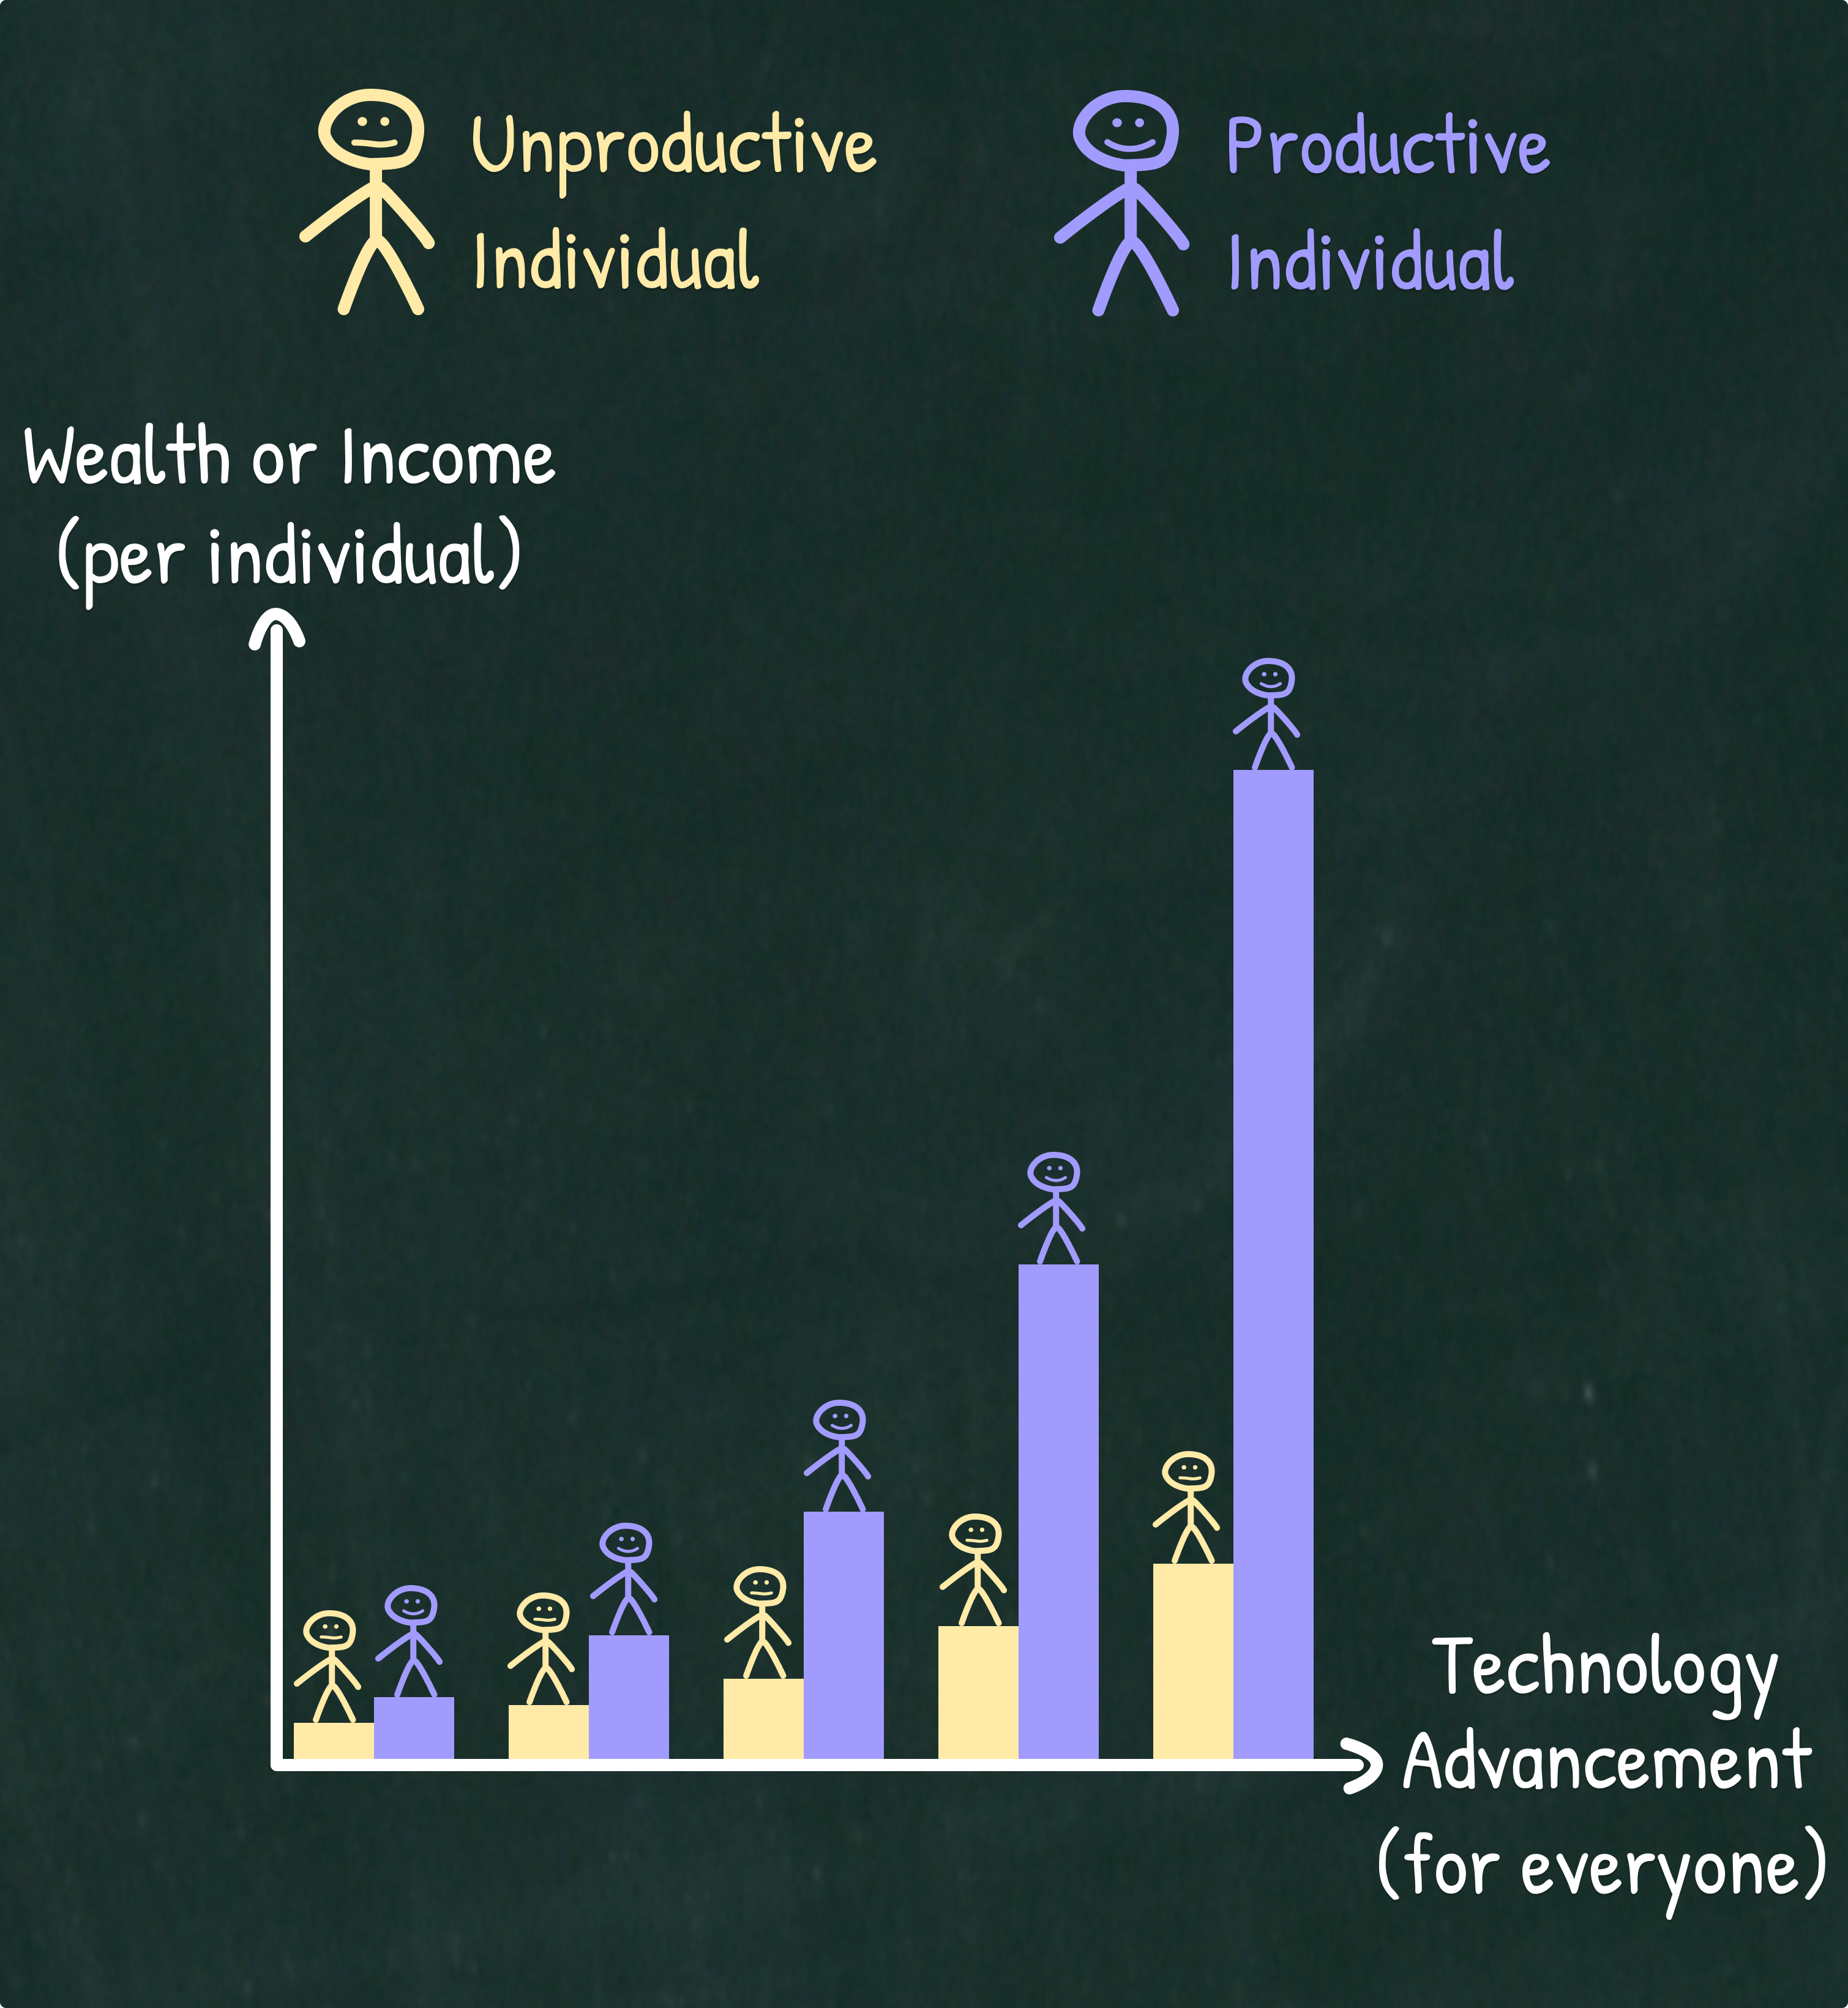 Illustration that shows how the advancement of technology leads to a bigger wealth gap between the productive and unproductive individual